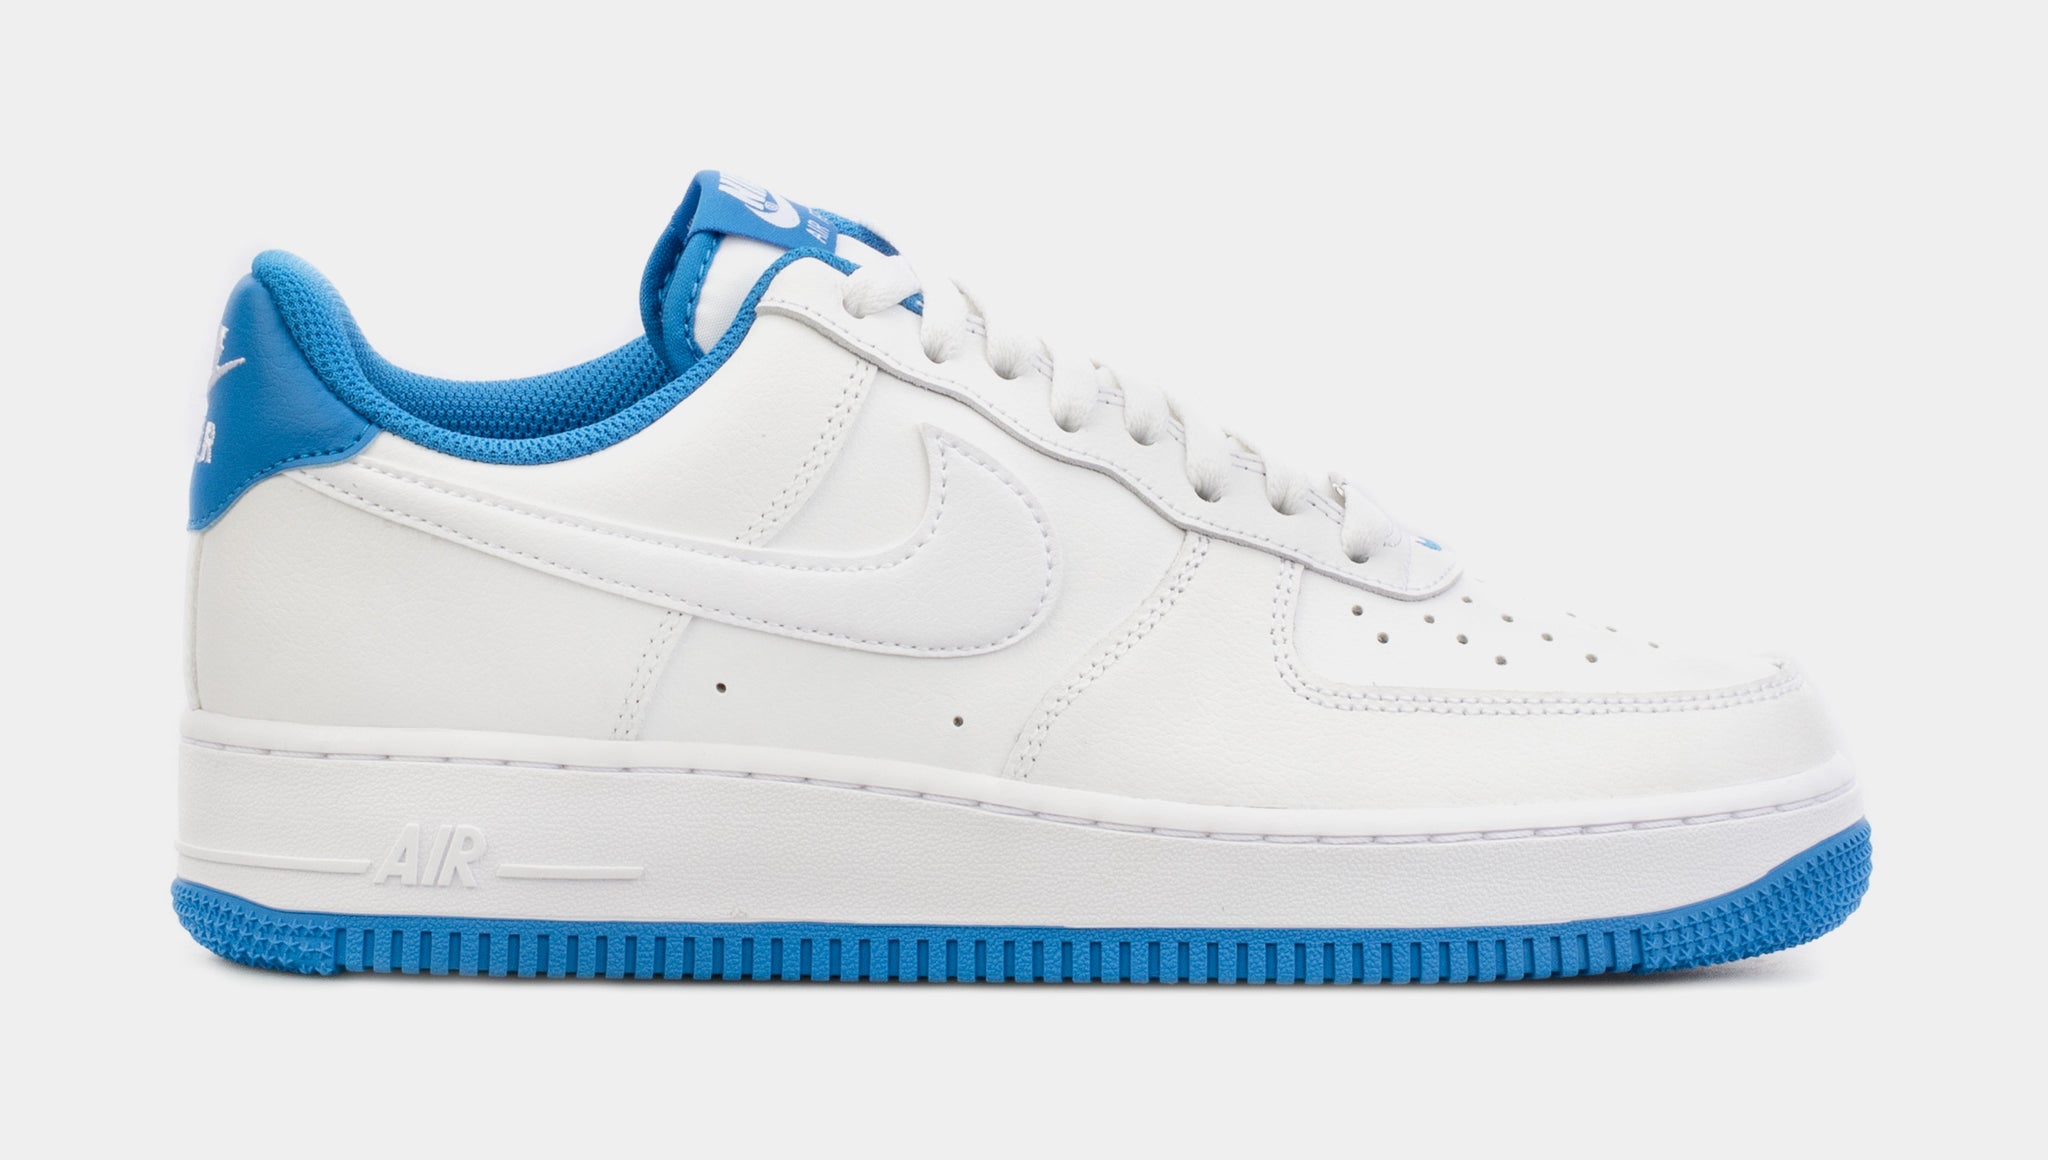 Nike Men's Air Force 1 '07 Shoes, Size 12, White/Blue/White